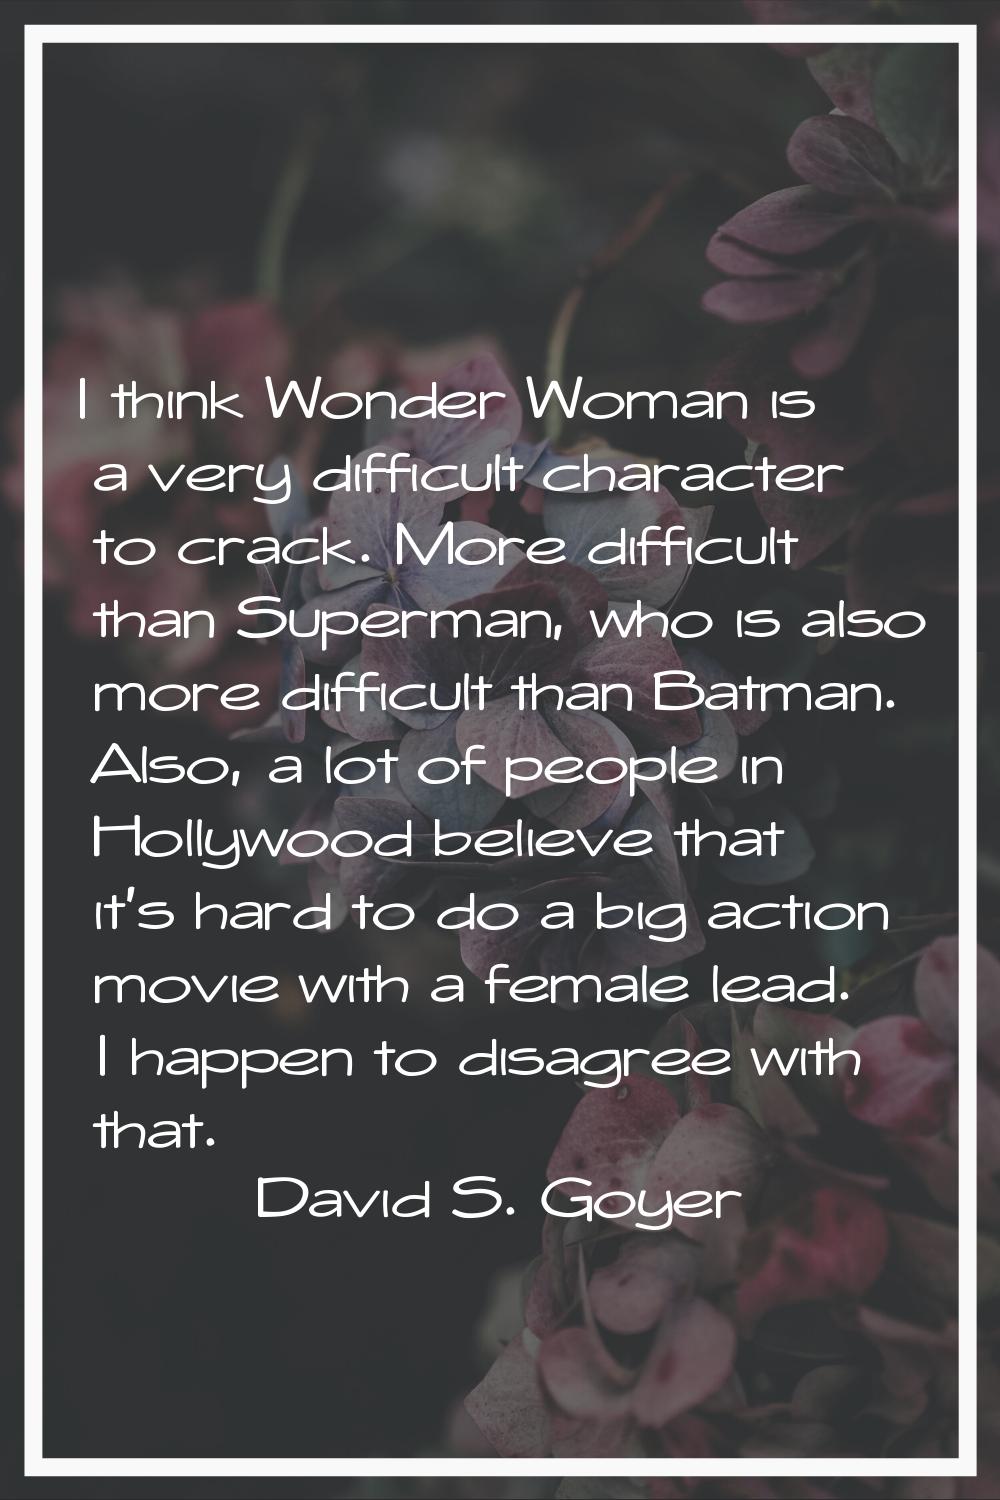 I think Wonder Woman is a very difficult character to crack. More difficult than Superman, who is a